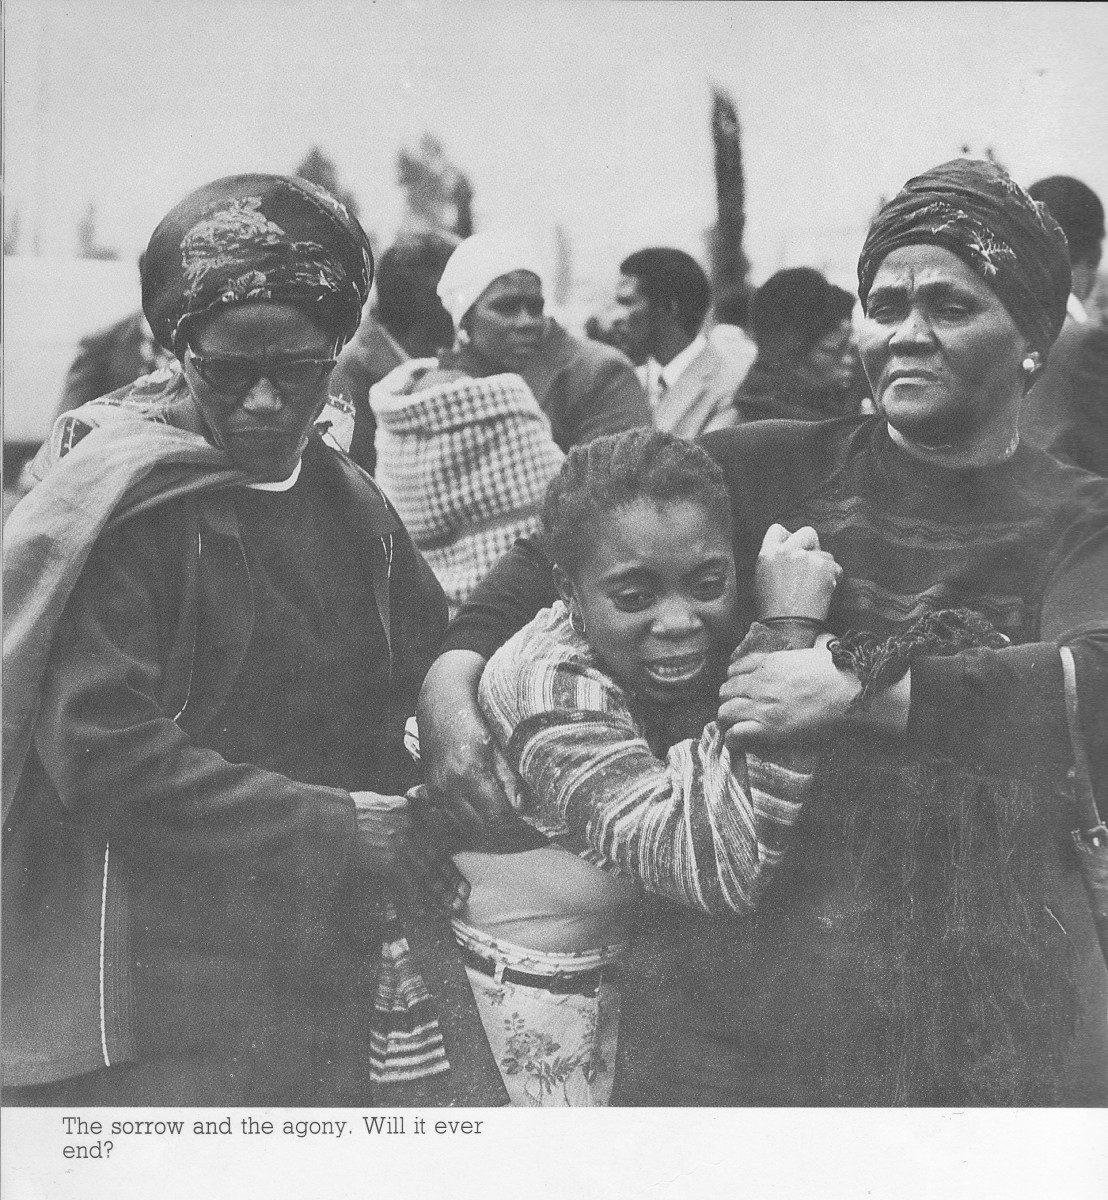 A woman crying from having lost a loved one. Africans spend most of their time, from the days of Apartheid murders and today's AIDS going to the cemetery to bury their dead, and crying most of the time.